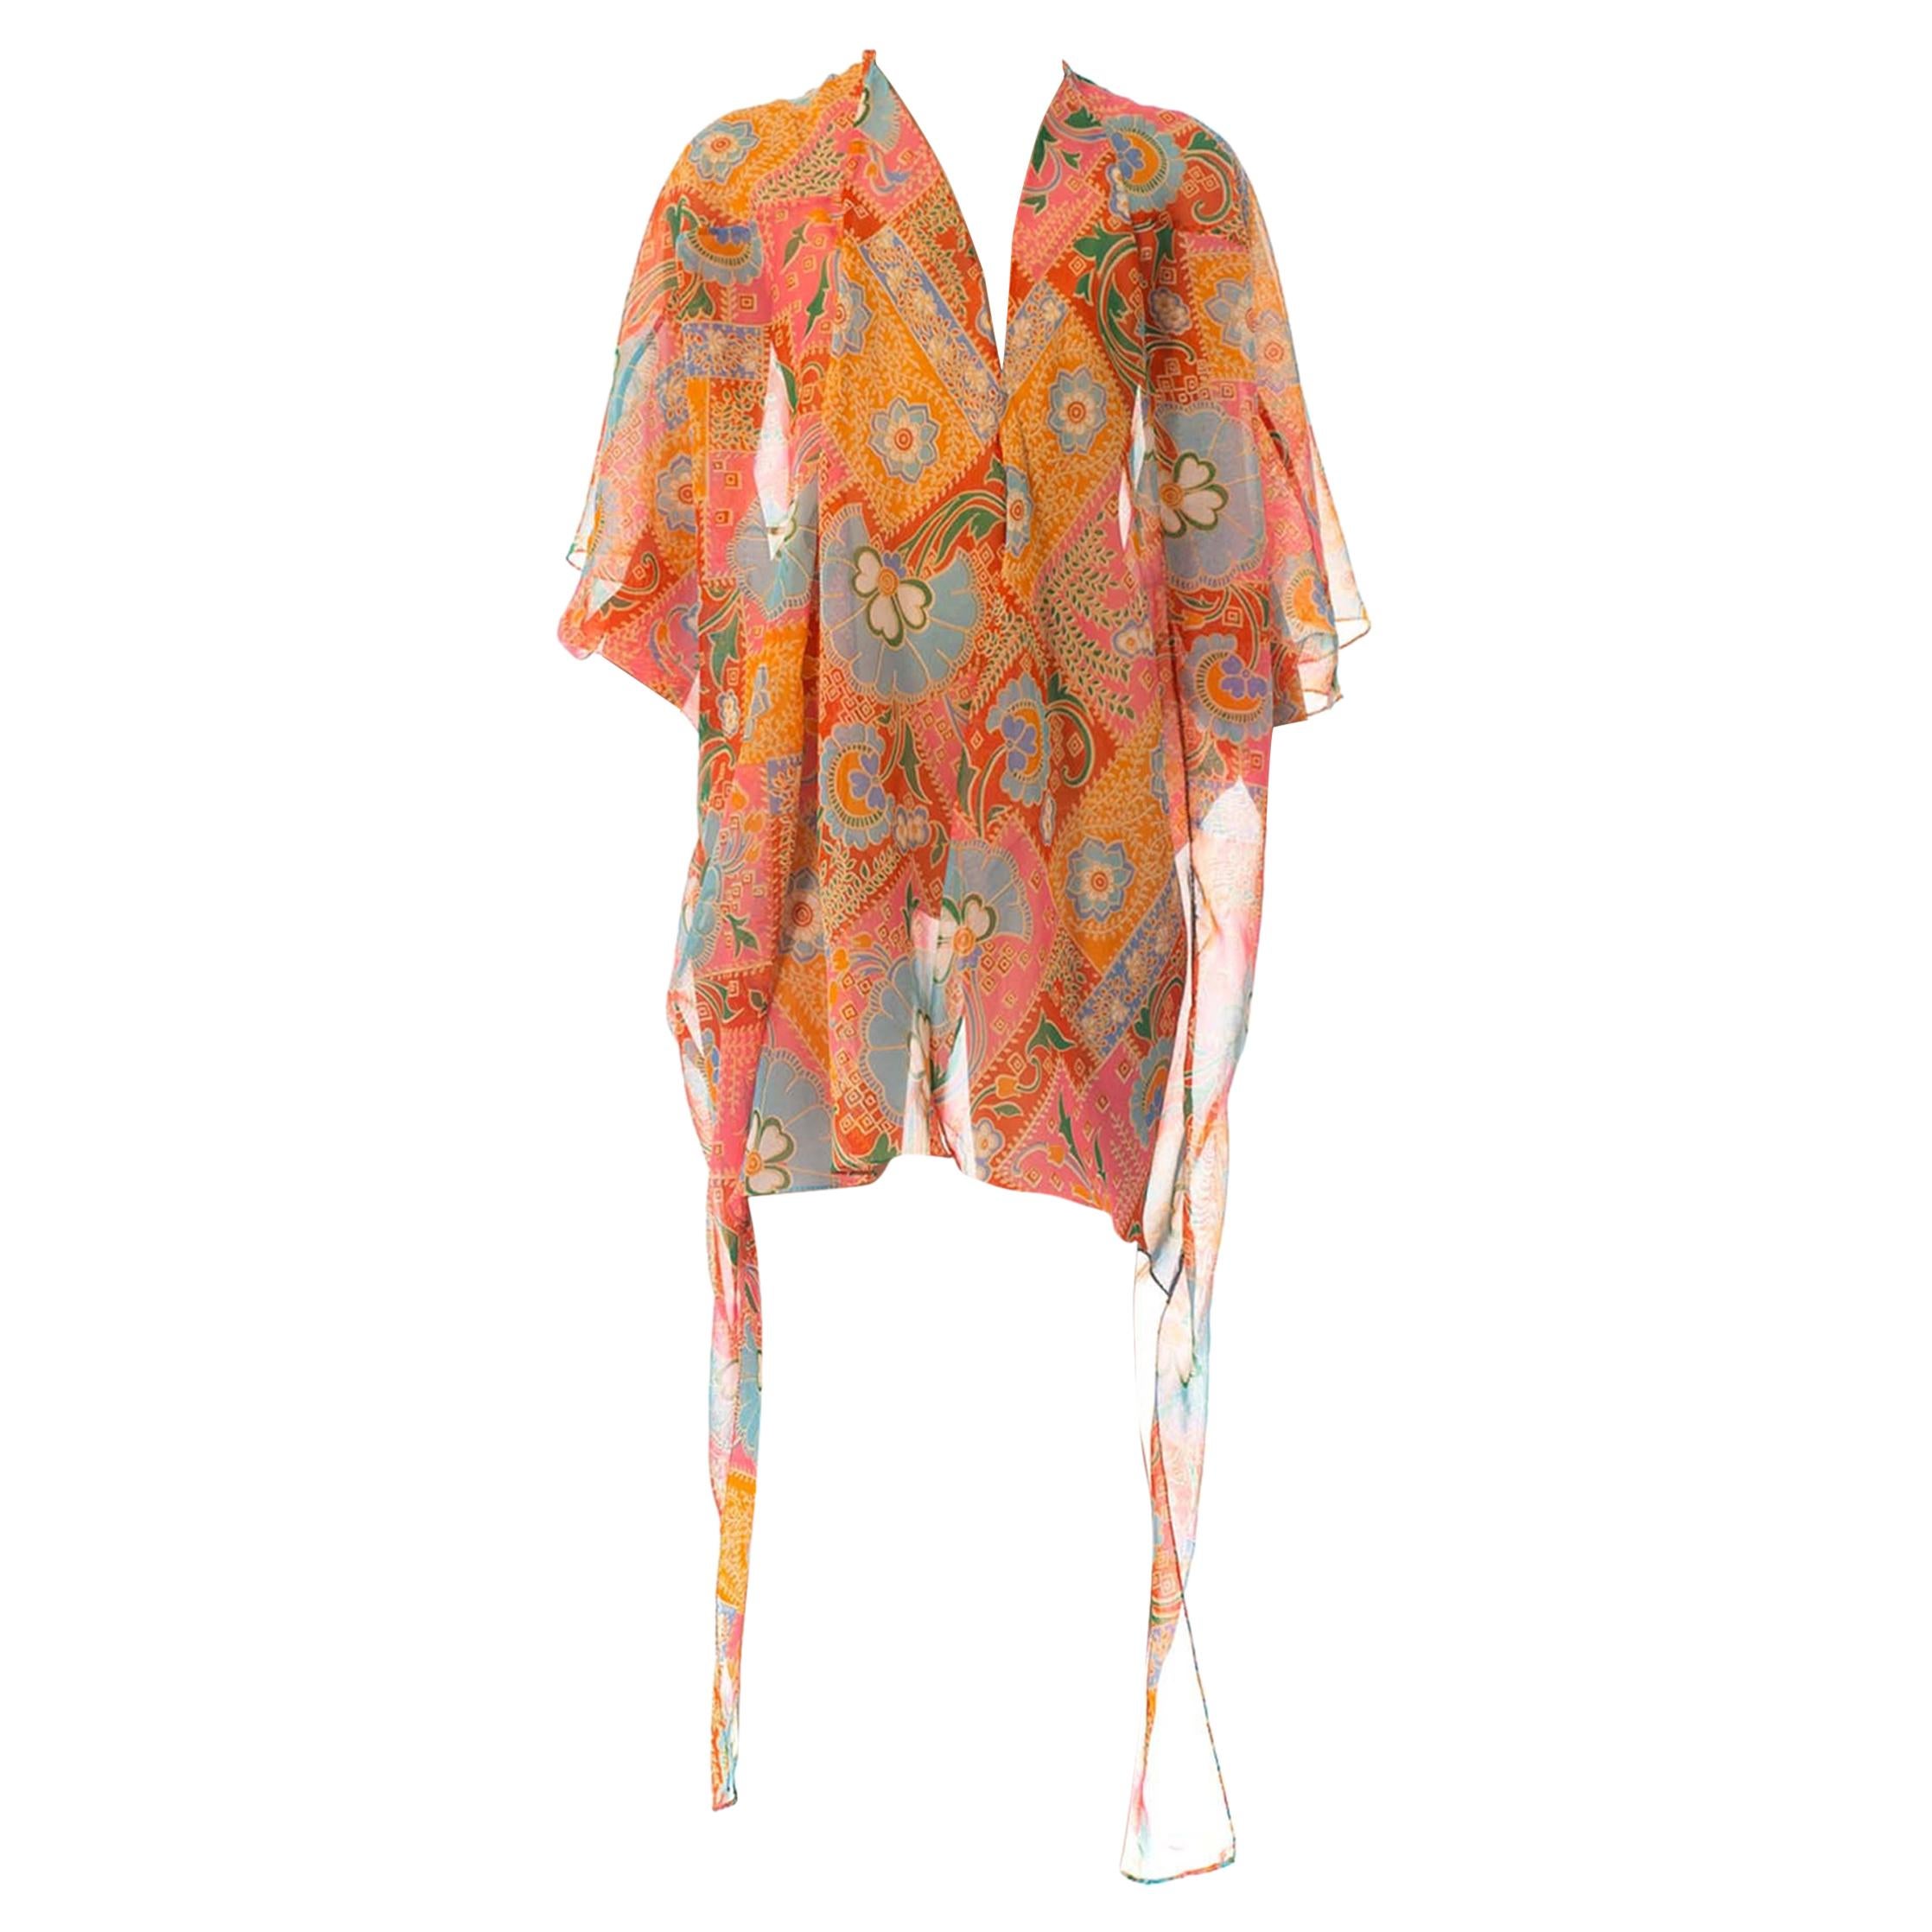 MORPHEW COLLECTION Psychedelic Polyester Organza Beach Cover-Up Cocoon